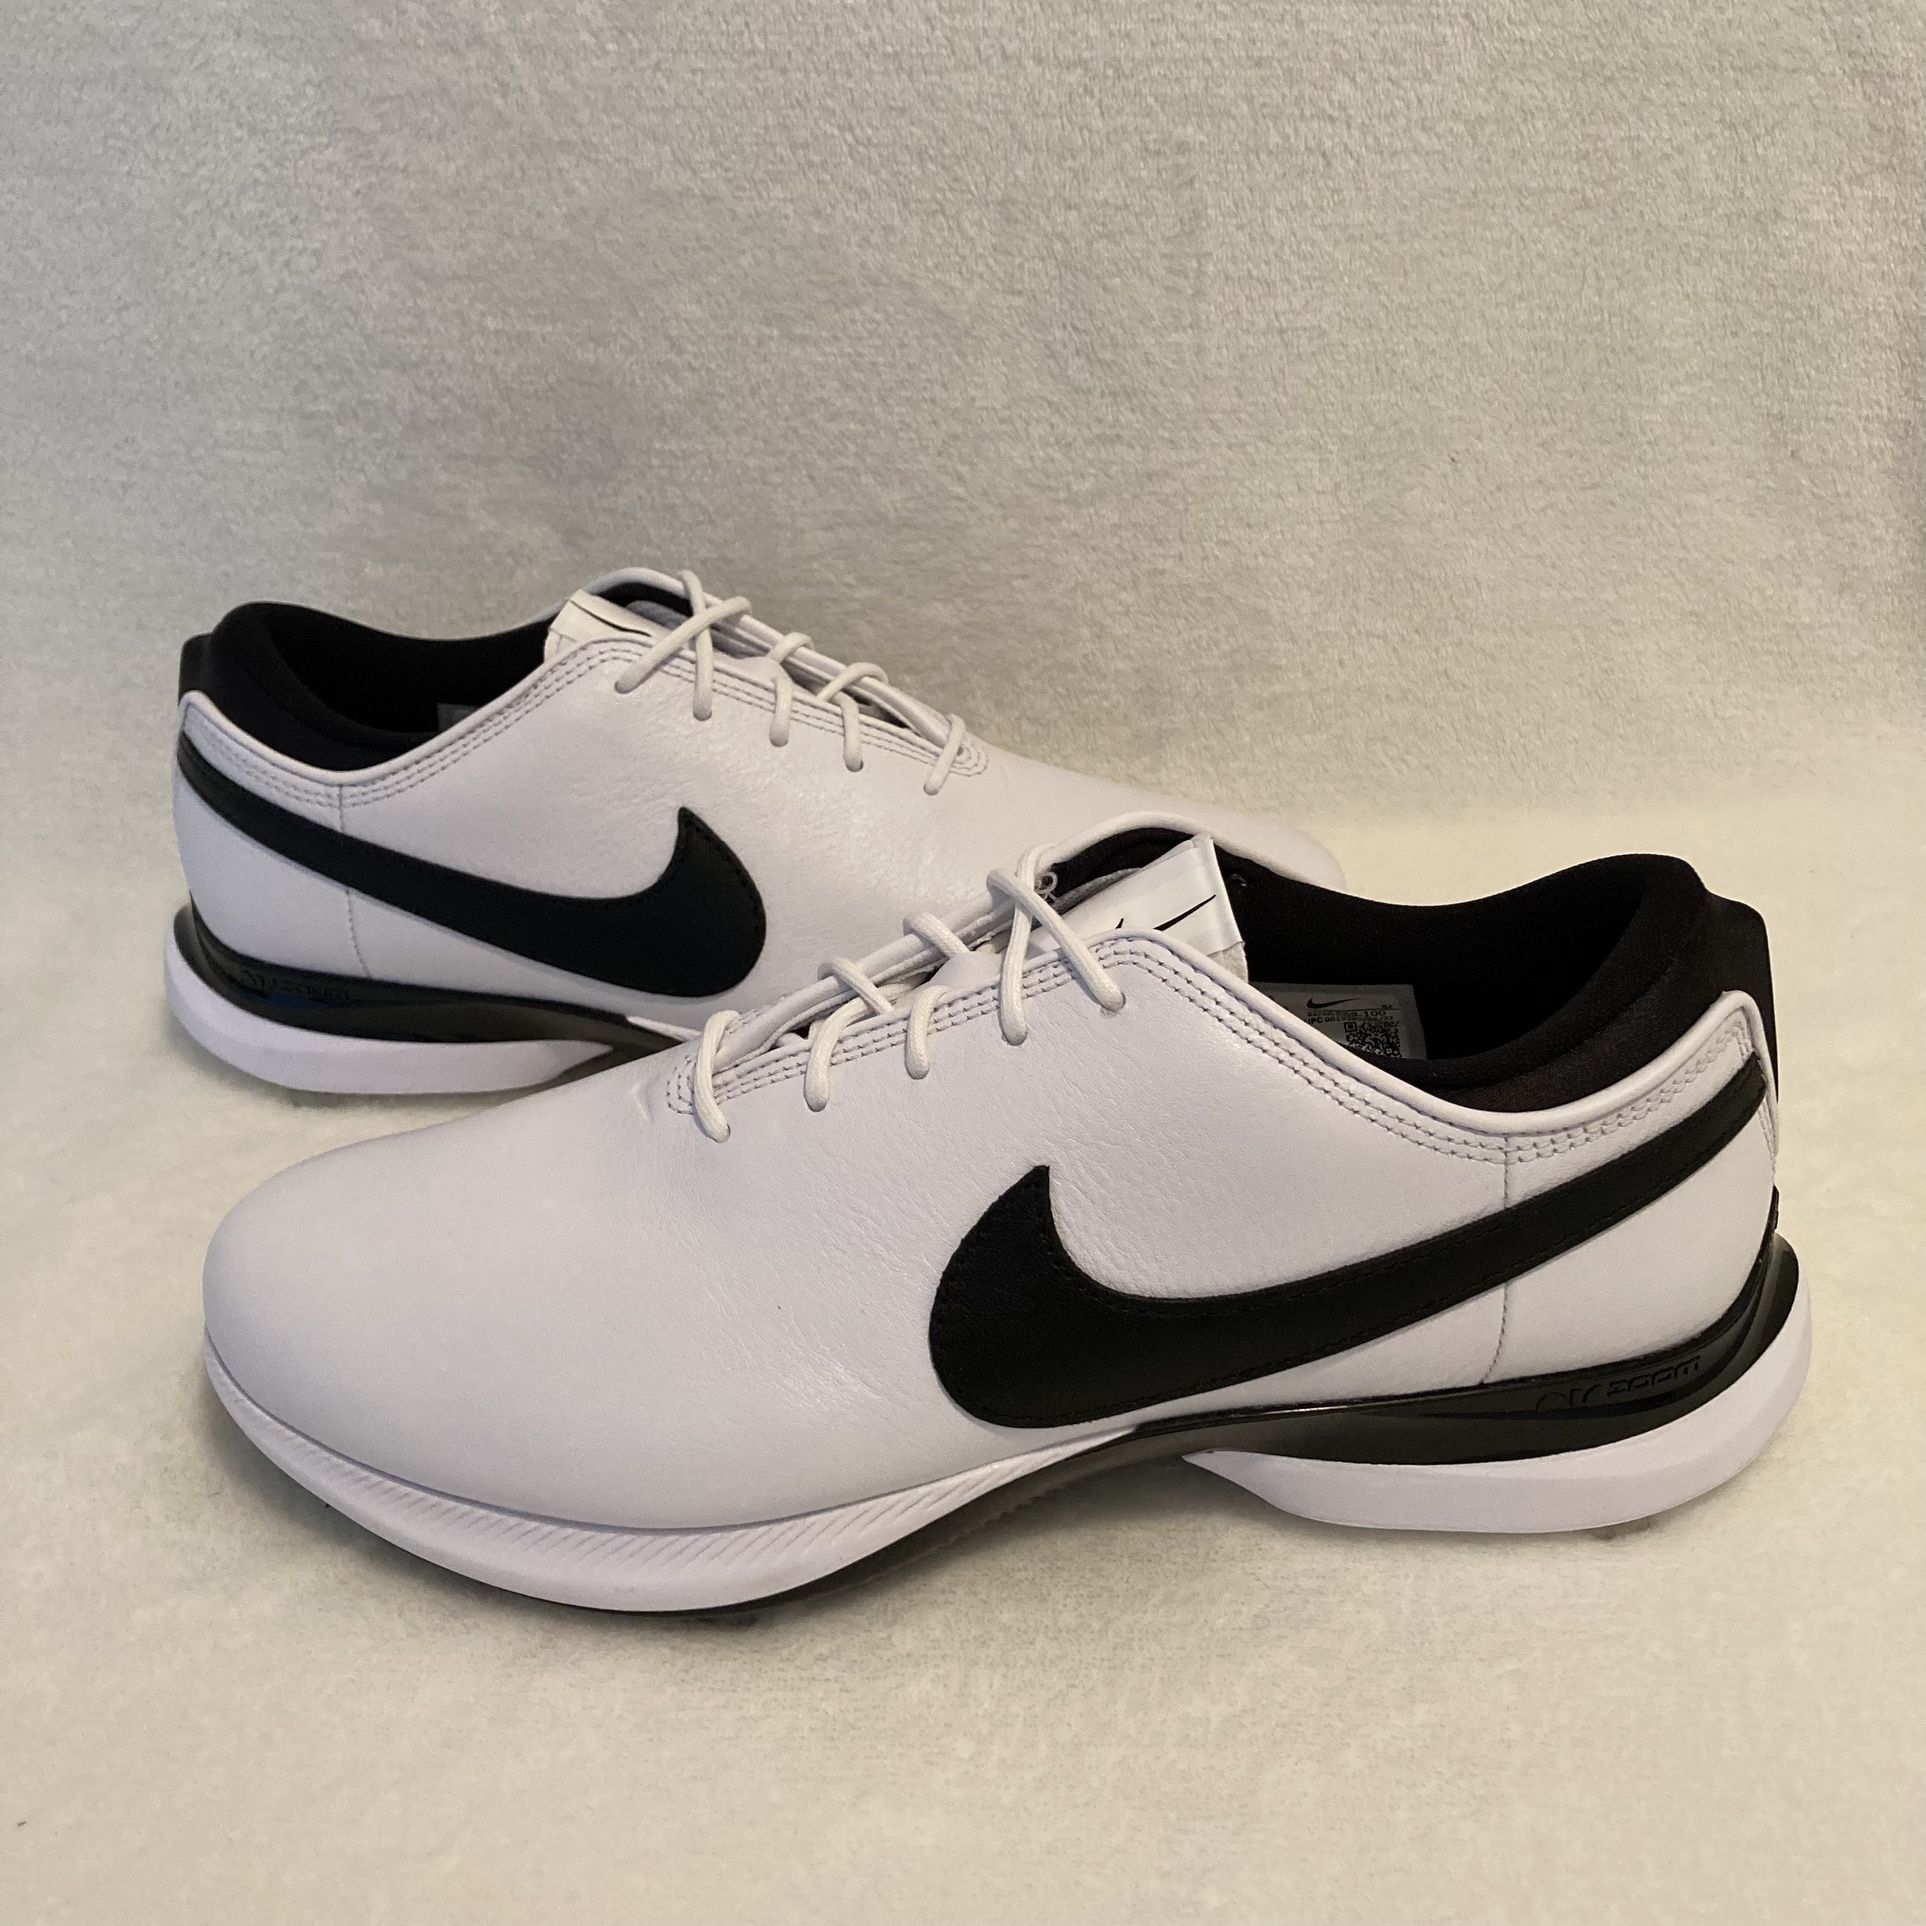 Men Nike Air Zoom Victory Tour 2 Golf Shoes White Black DJ6569-100 Size 9.5  for Sale in Ventura, CA - OfferUp